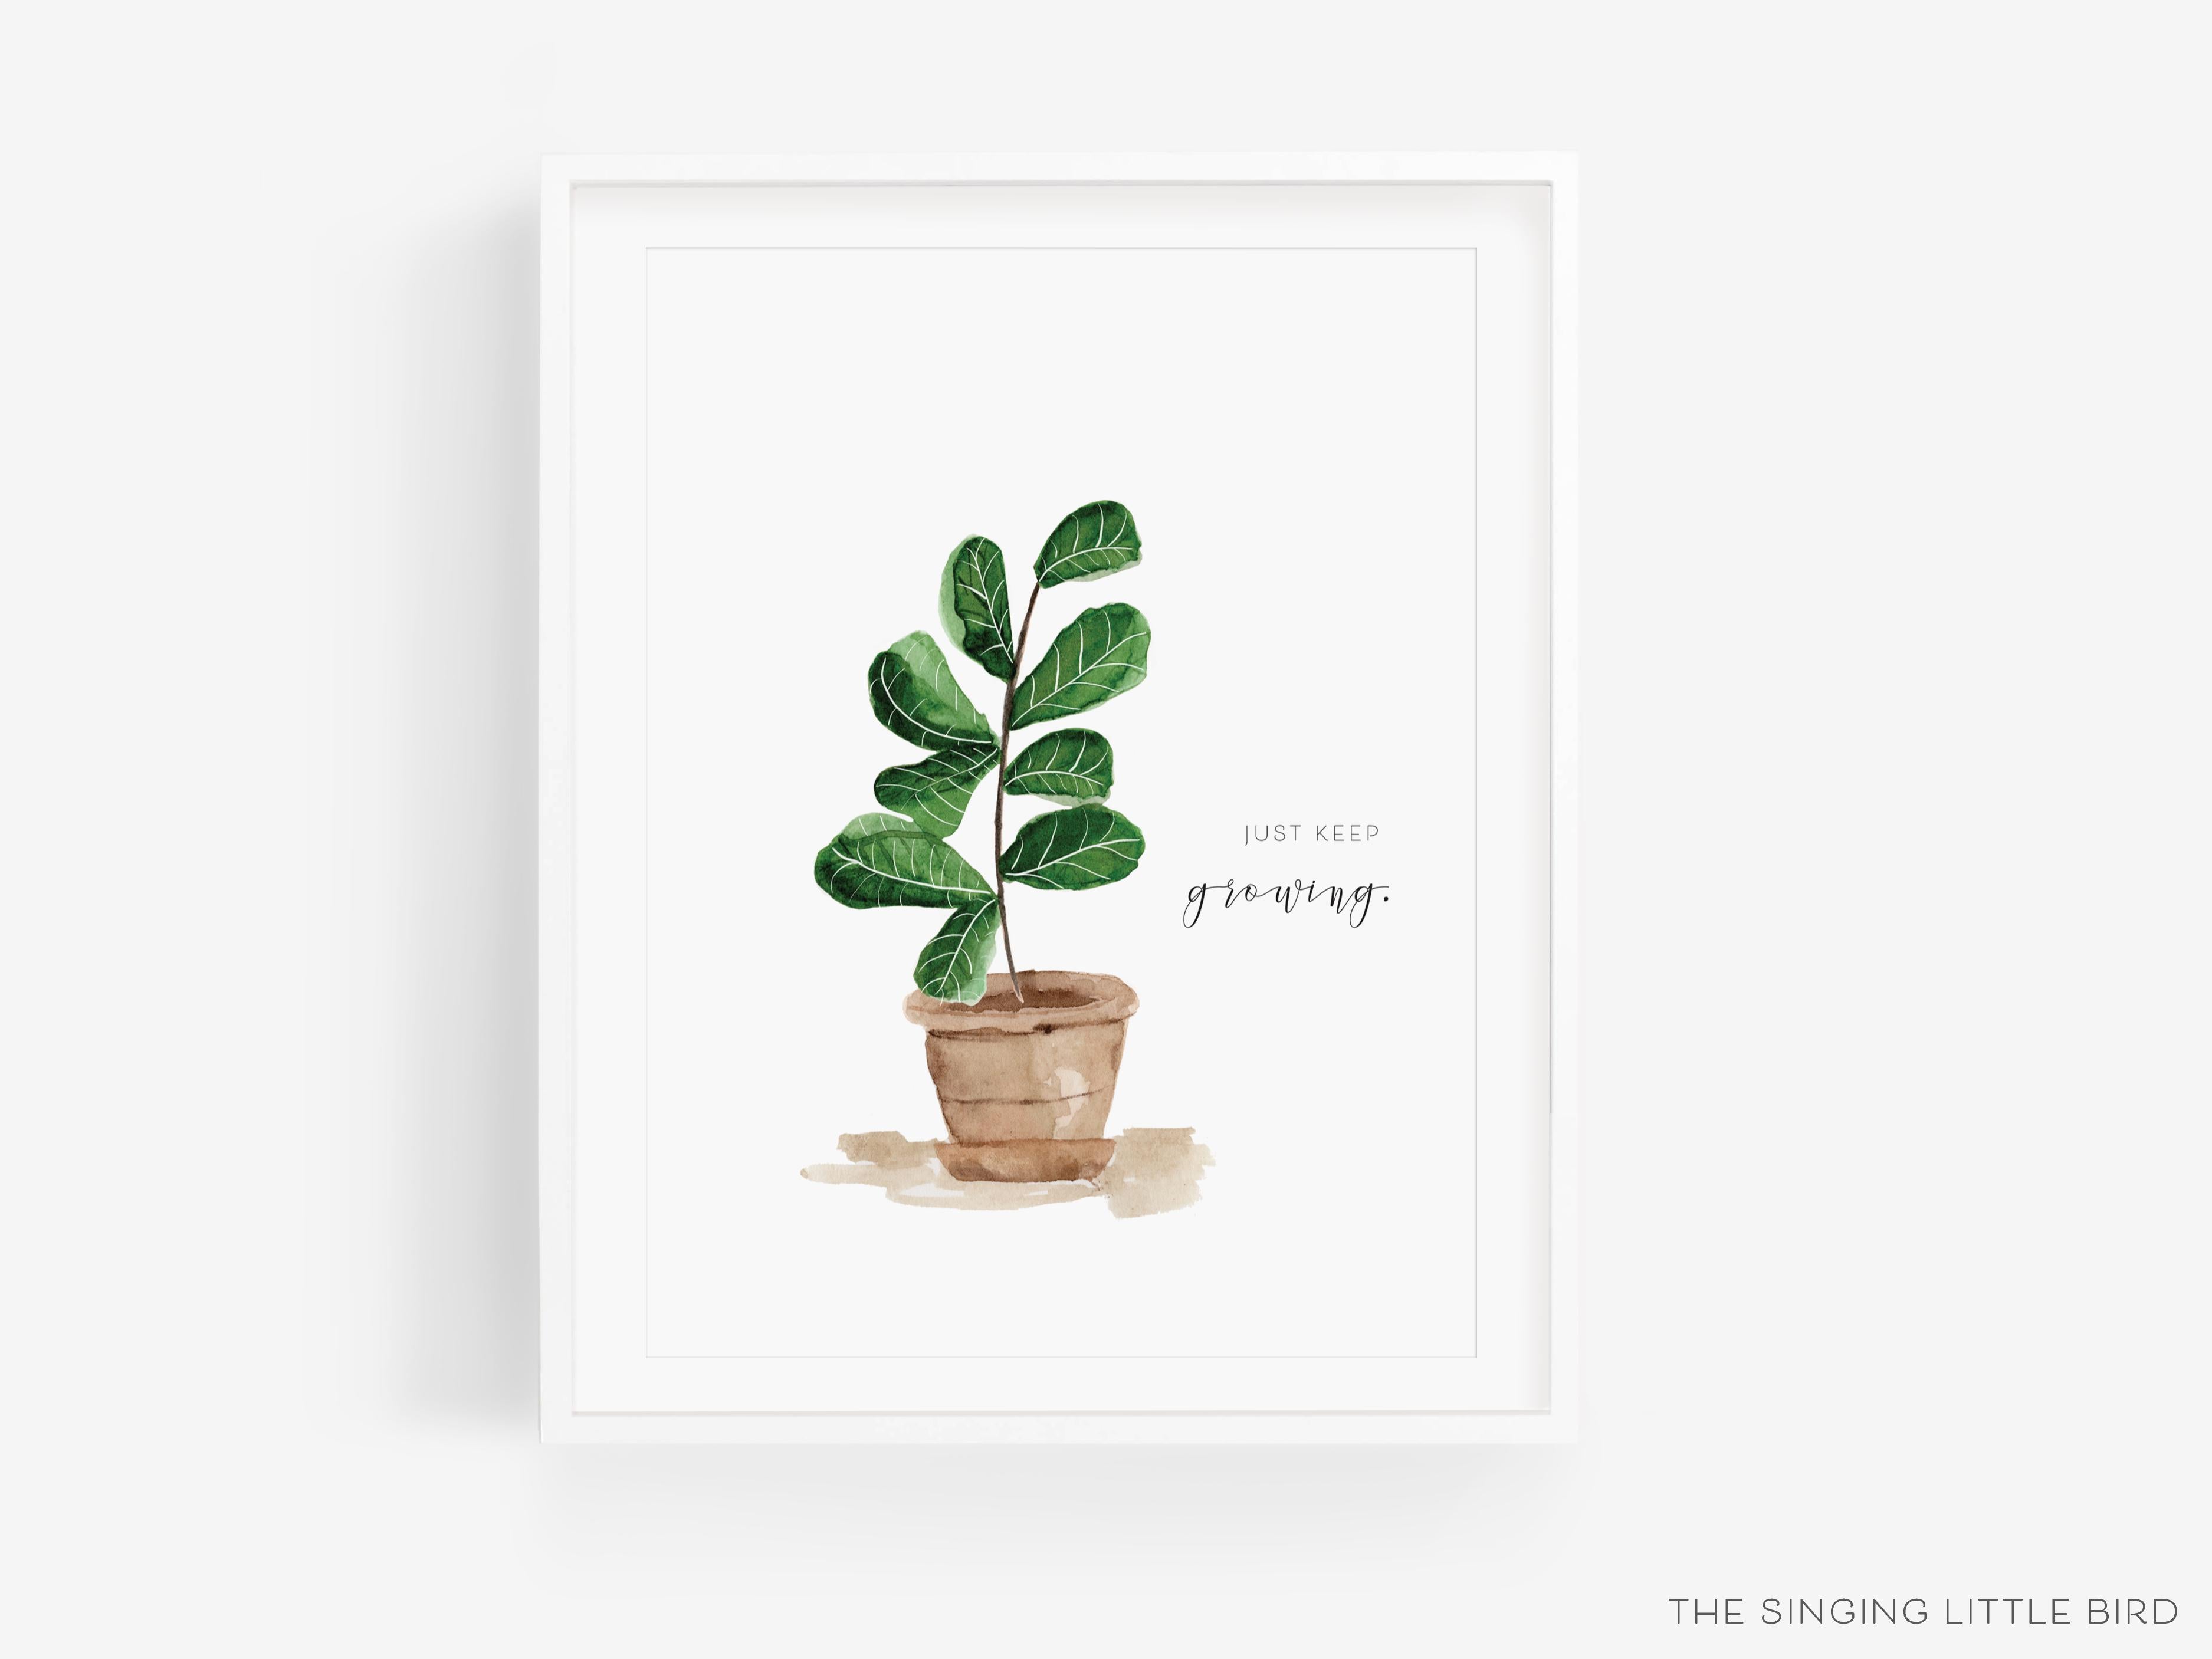 Fiddle Leaf Fig Quote Art Print-This watercolor art print features our hand-painted fiddle leaf fig and "Just keep growing" quote, printed in the USA on 120lb high quality art paper. This makes a great gift or wall decor for the plant lover in your life.-The Singing Little Bird